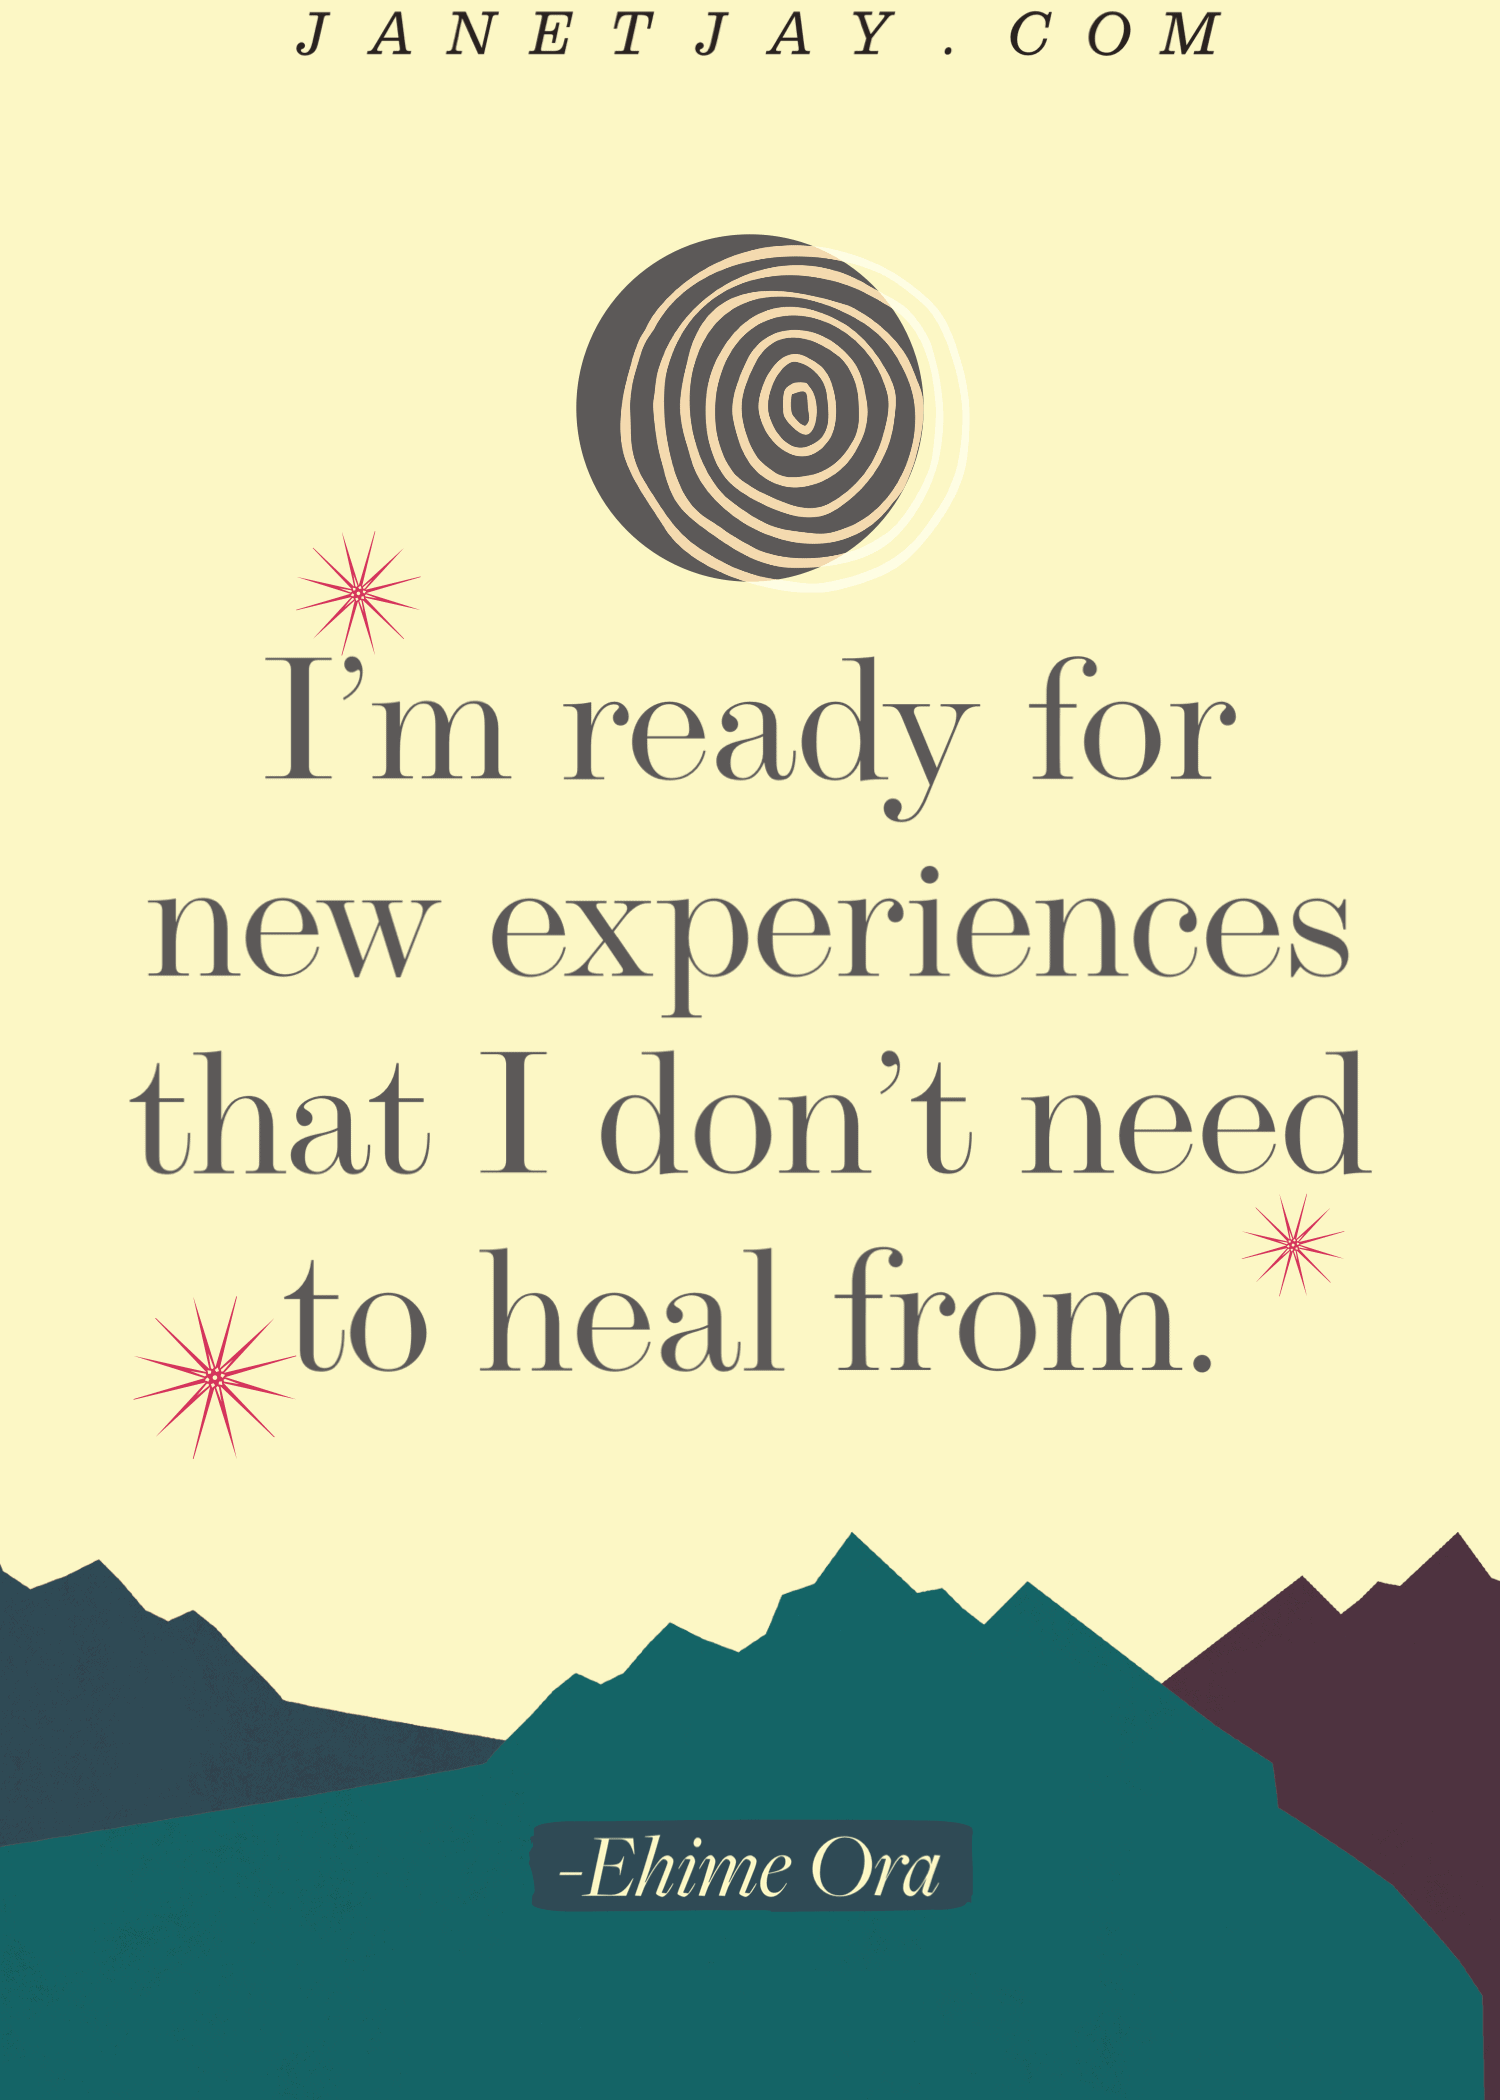 On a background of mountains and a moon, "I'm ready for new experiences that I don't need to heal from." - Ehuime Ora, Janetjay.com